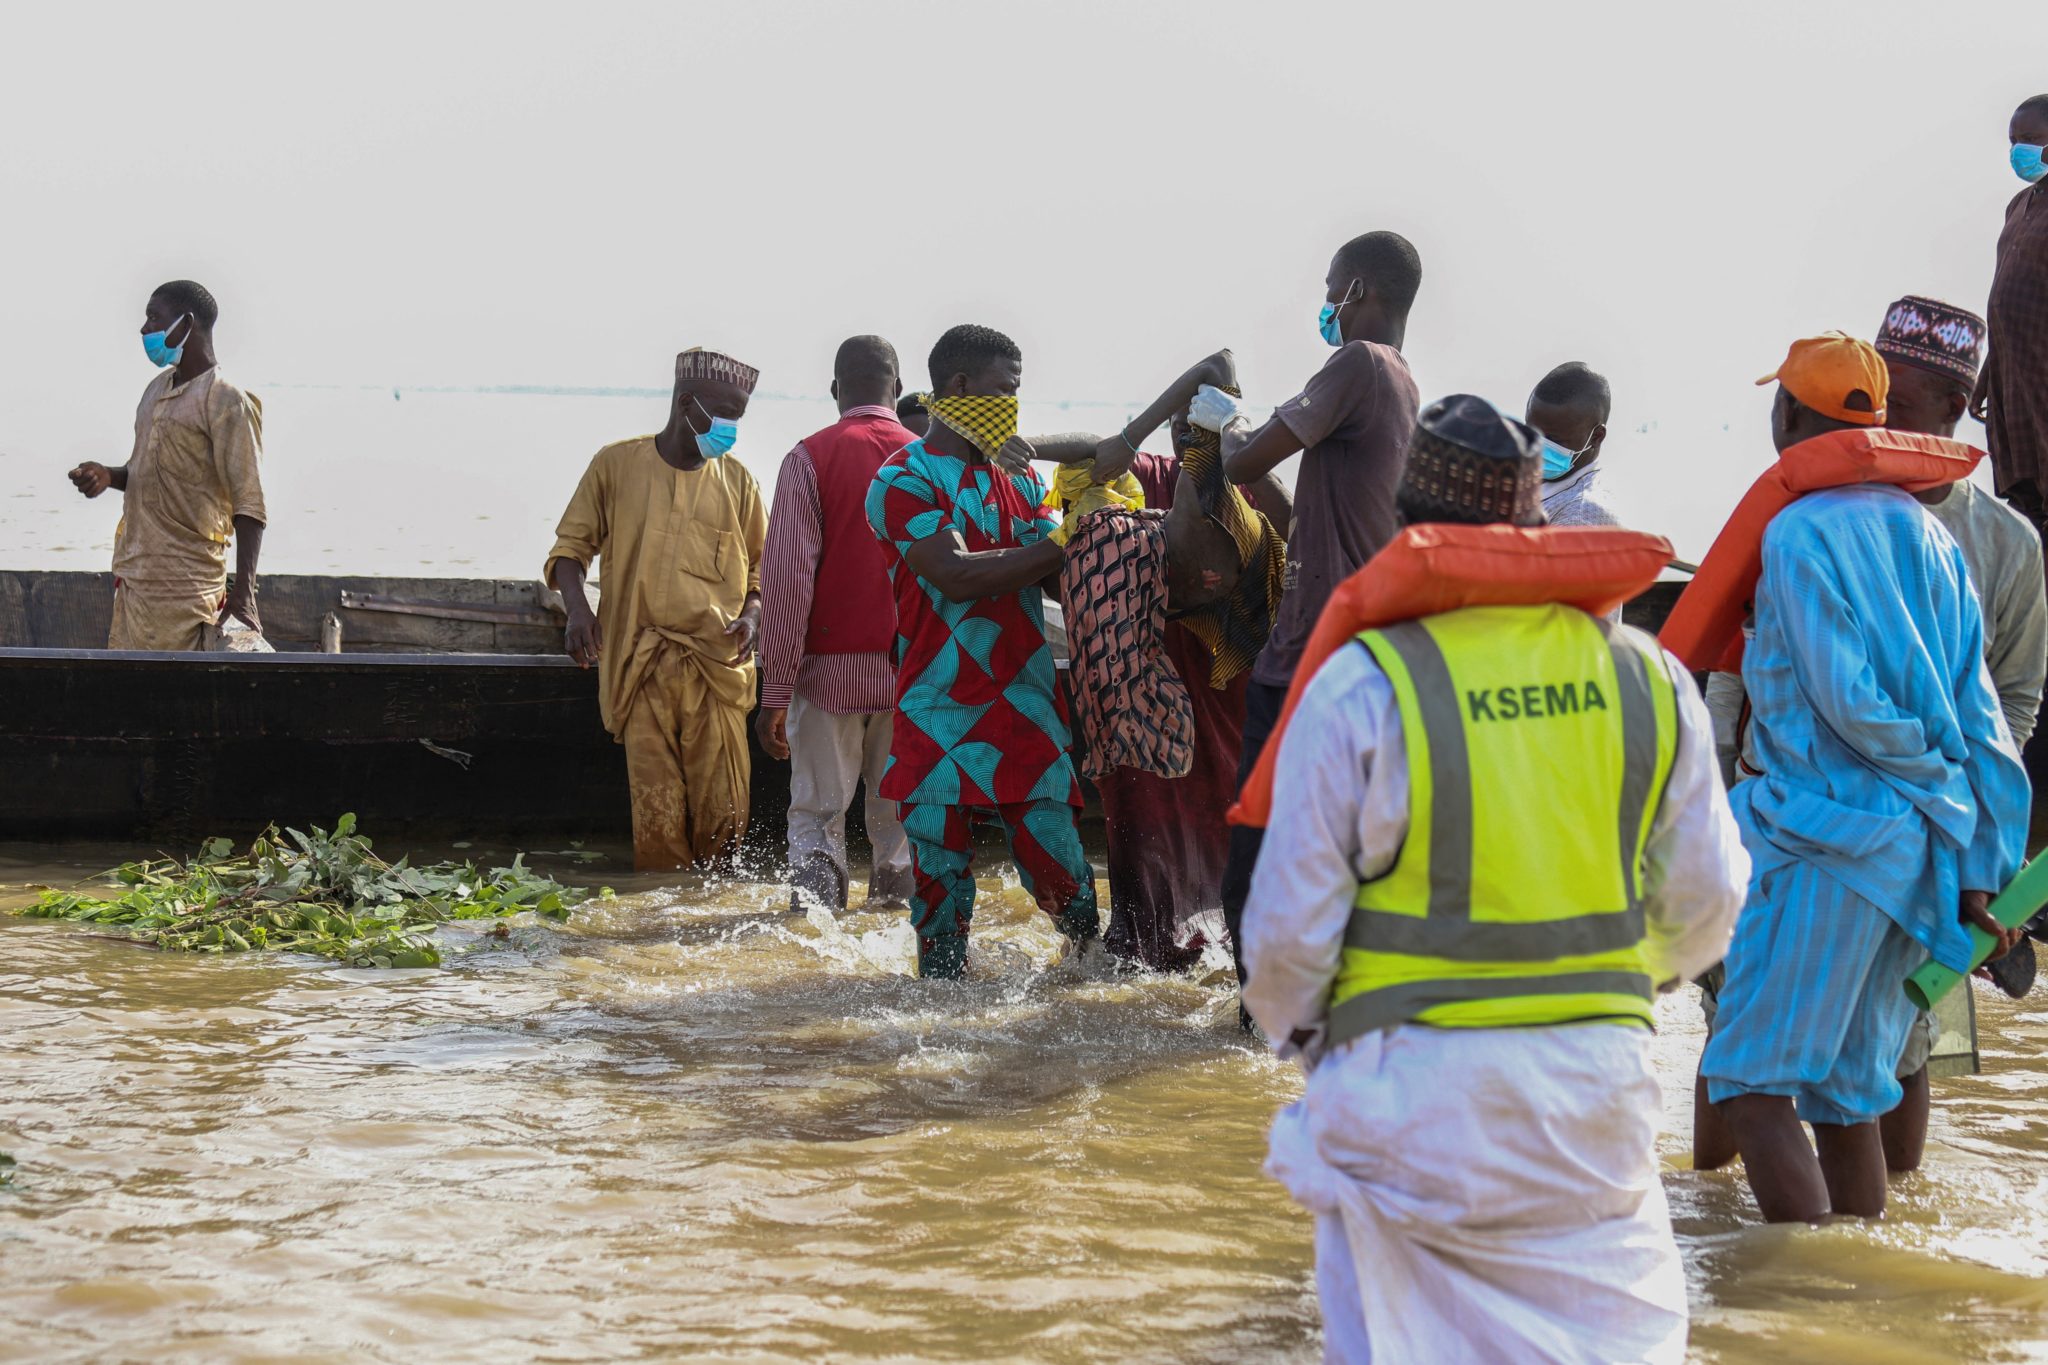 13 Wedding Guests Drown After Boat Capsizes In Nigeria Inquirer News 0304